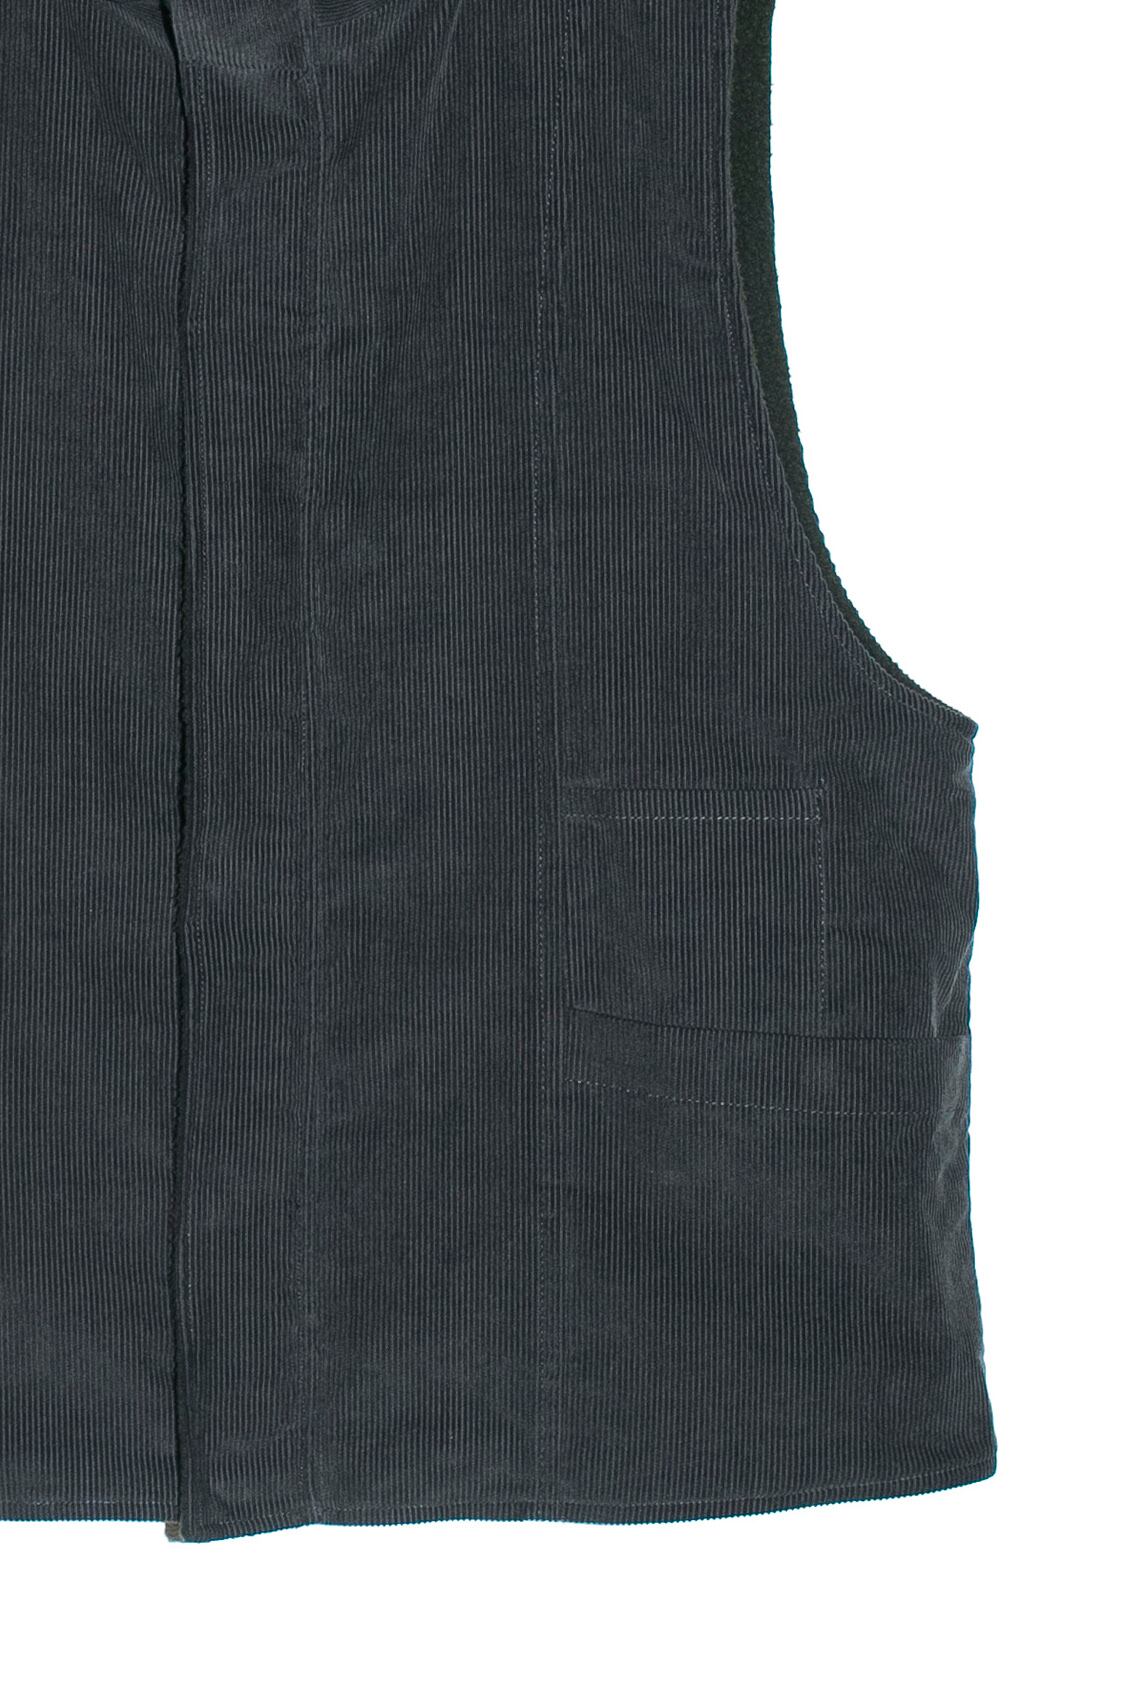 【wonderland】 Useful vest (CHARCOAL×OLIVE) / ワンダーランド リバーシブルベスト | ROGER'S  North land powered by BASE